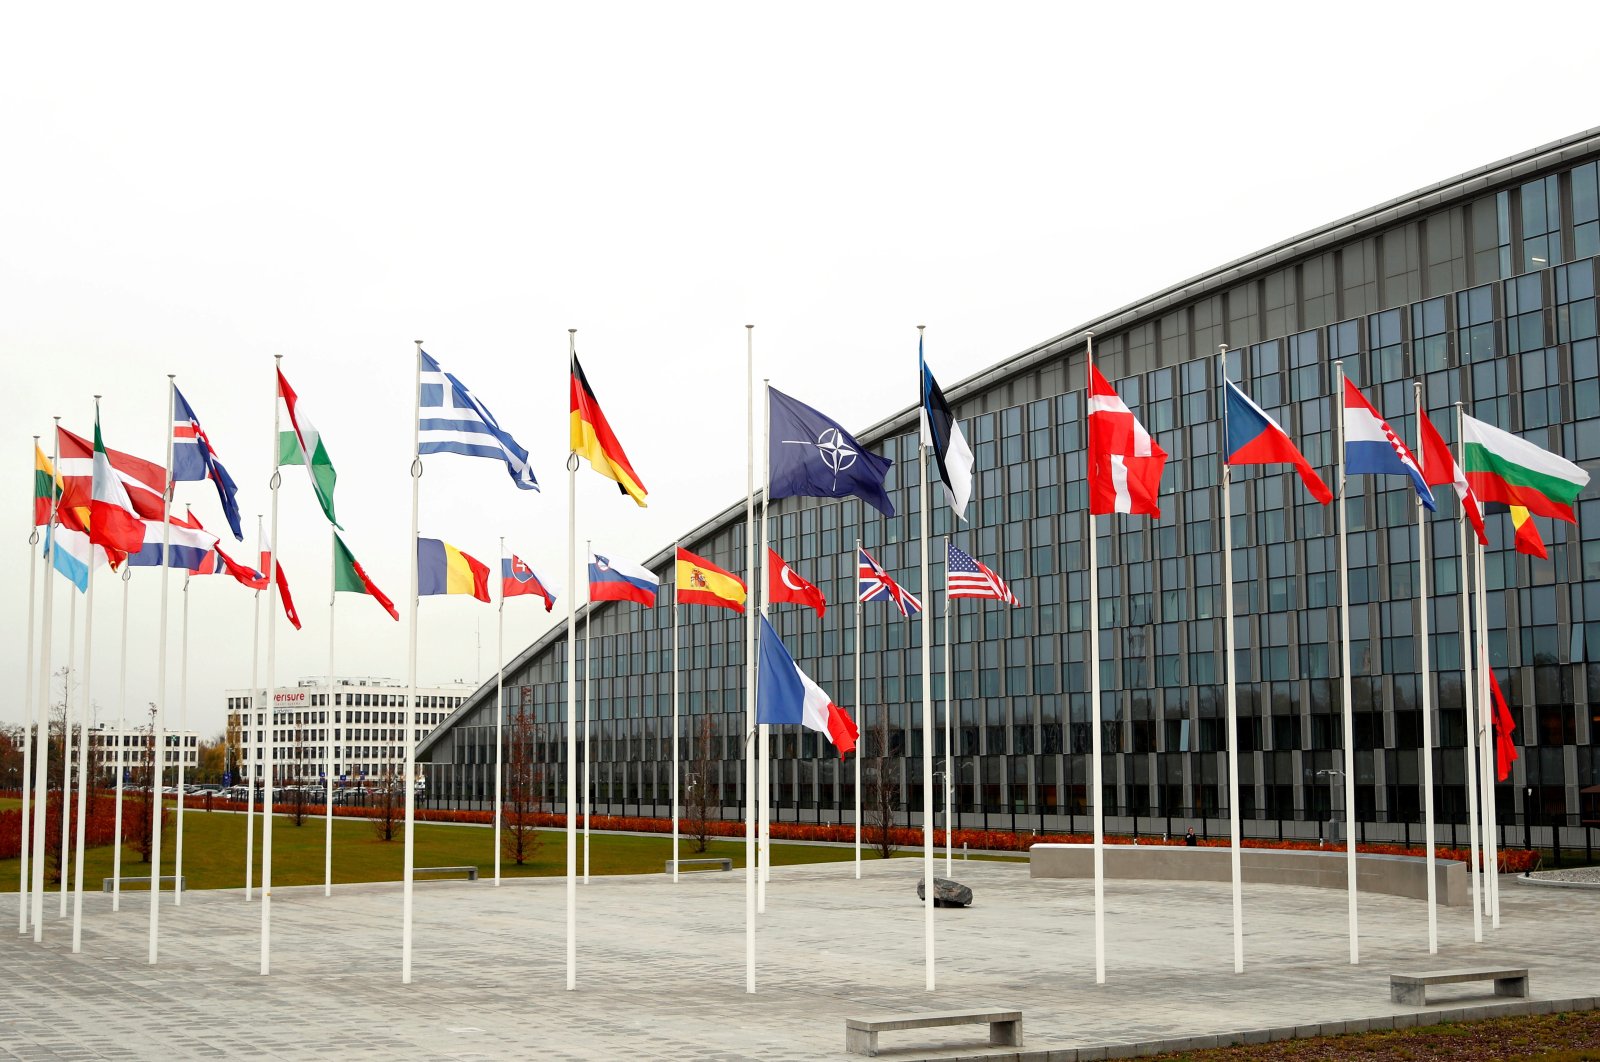 Flags of NATO member countries are seen at the alliance's headquarters in Brussels, Belgium, Nov. 26, 2019.  (REUTERS)